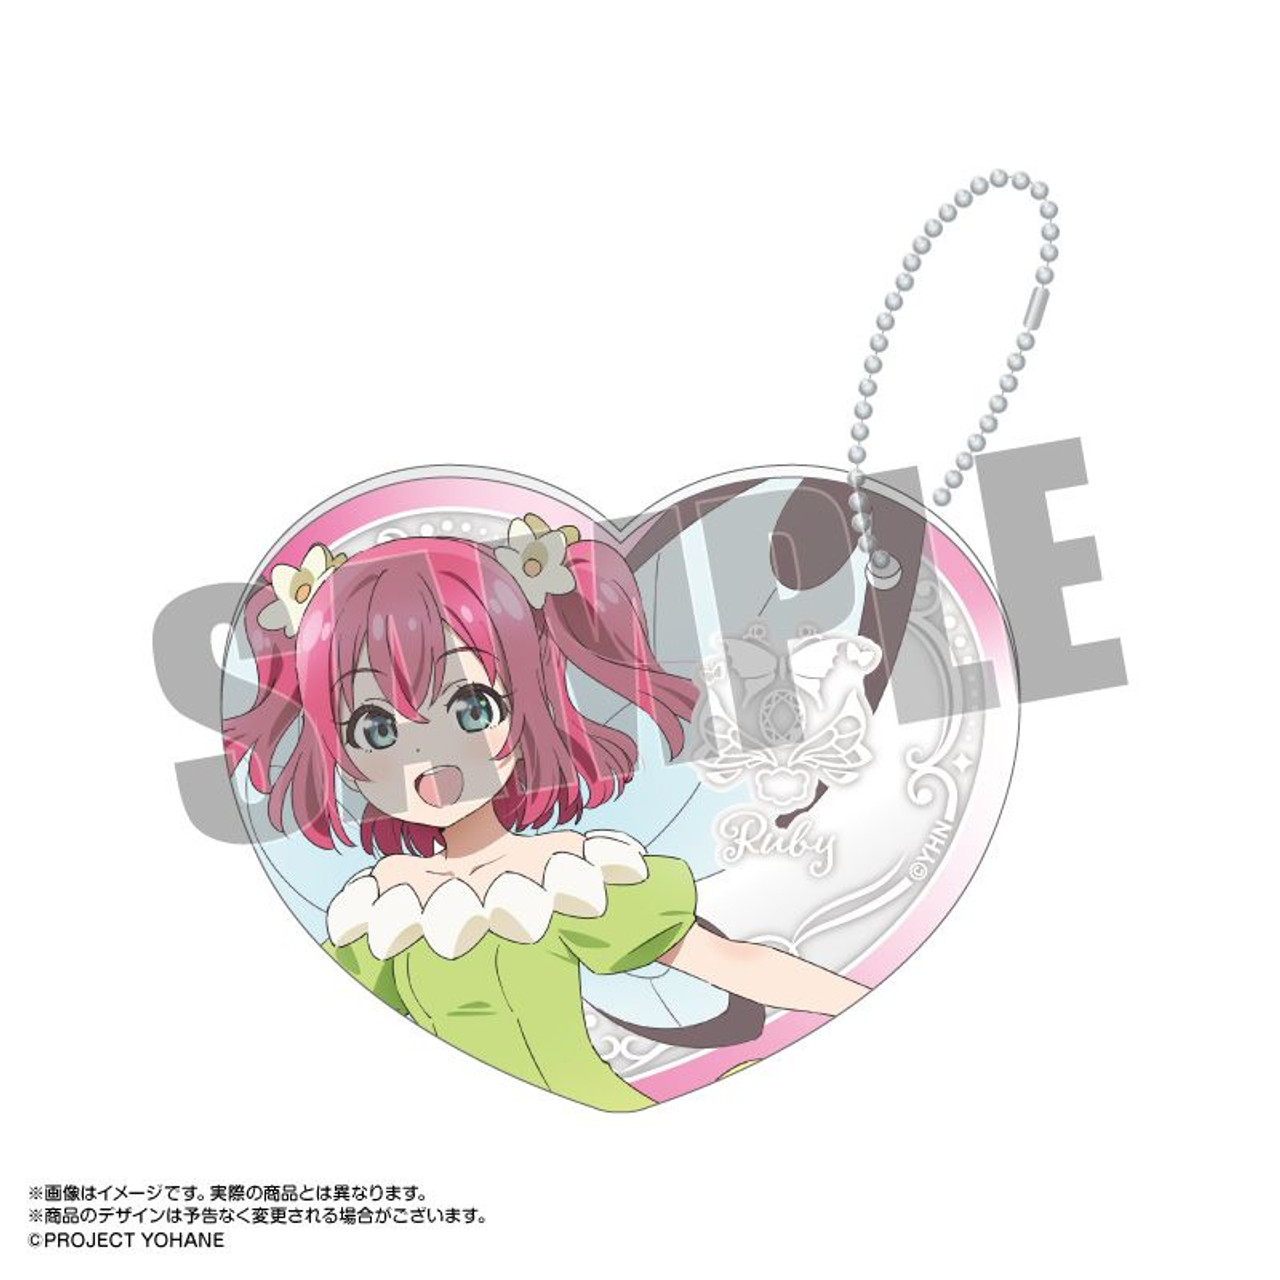 Manaria Friends Clear File / A (Anime Toy) - HobbySearch Anime Goods Store